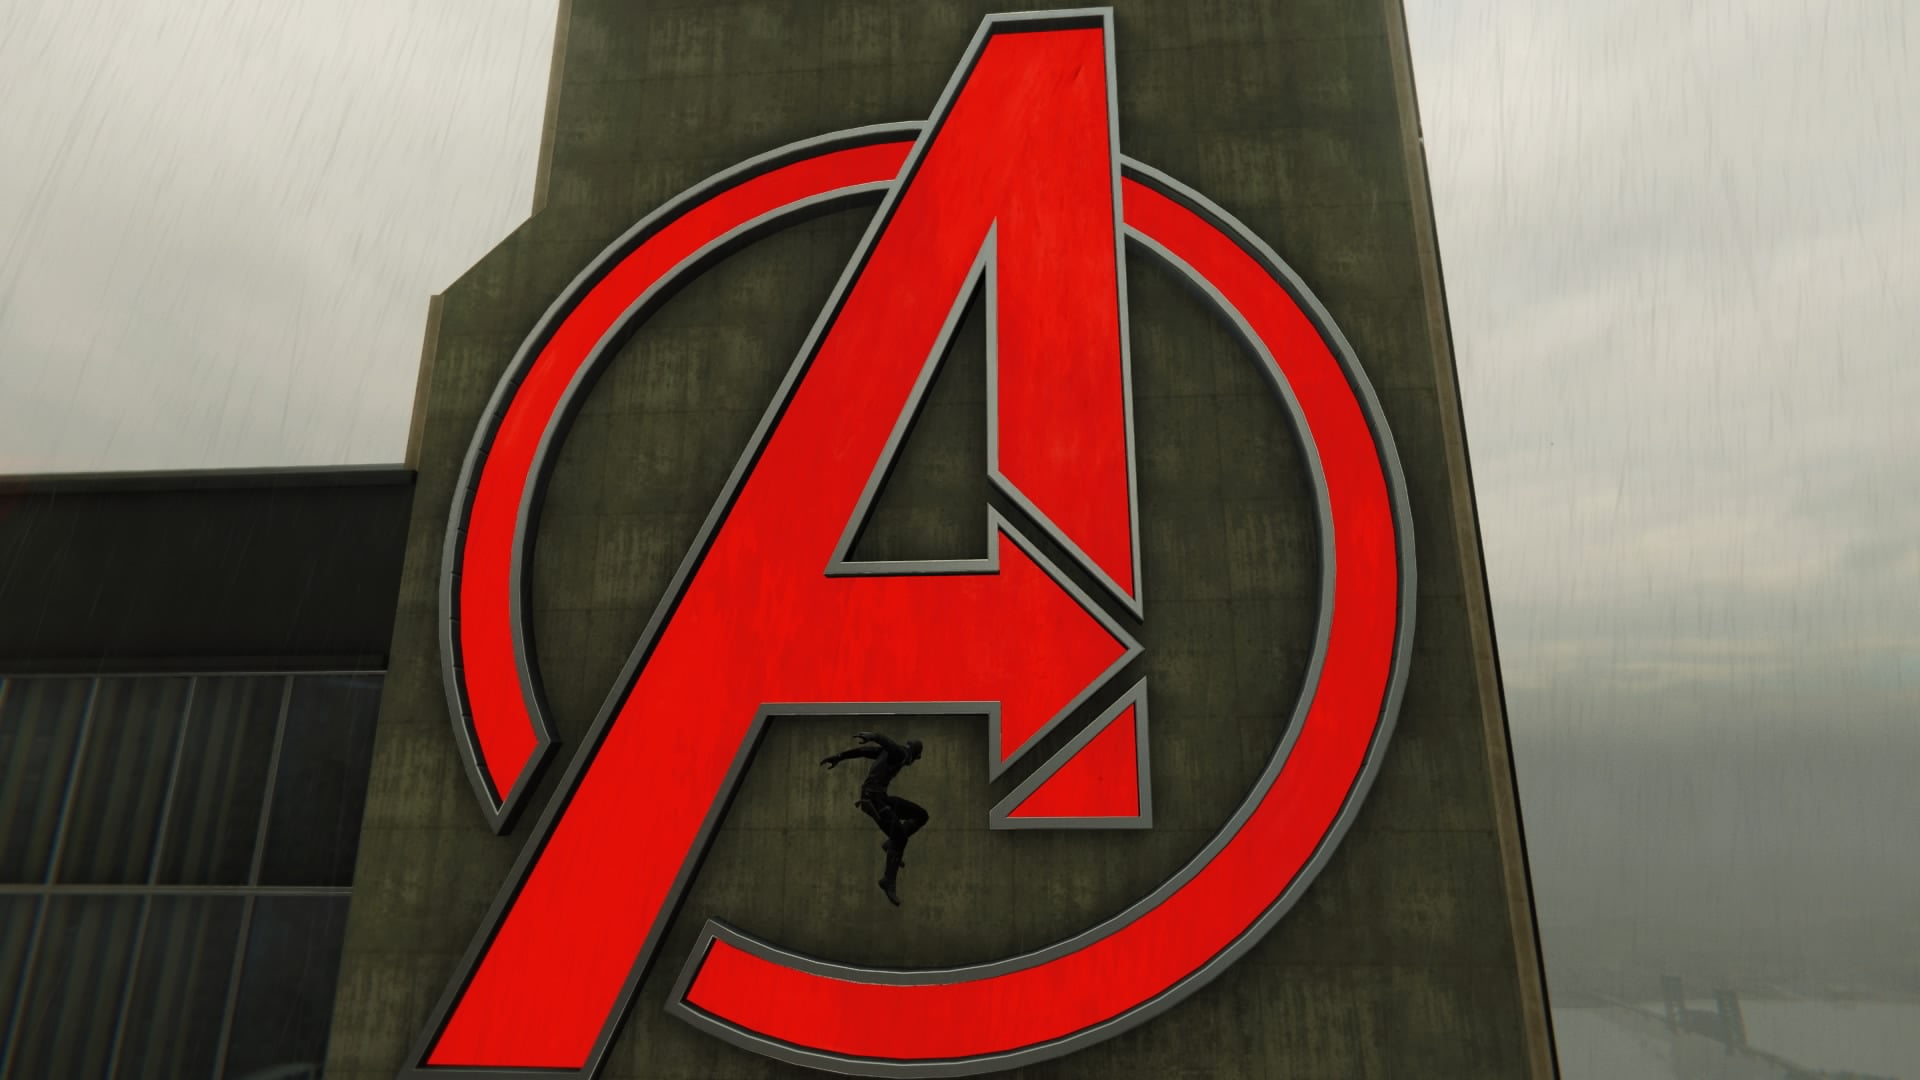 PlayStation, PlayStation 4, Spider-Man, Marvel's Avengers, The Avengers